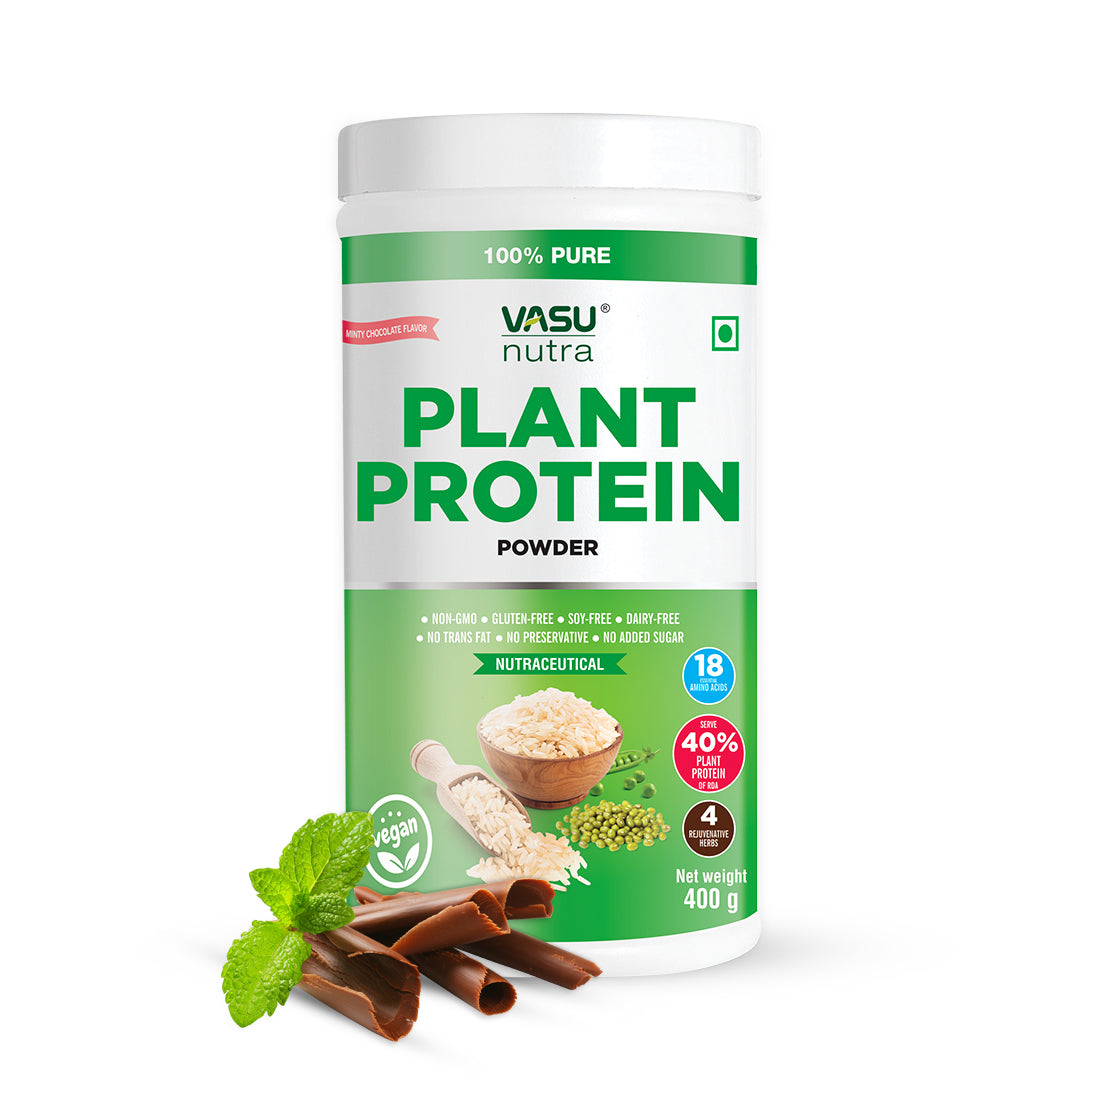 Vasu Nutra 100% Pure Plant Protein Powder For Men & Women 400g - Brown Rice & Pea Protein - Daily Protein Supplement - 18 Essential Amino Acids & 4 Rejuvenating Herbs - Minty Chocolate Flavor